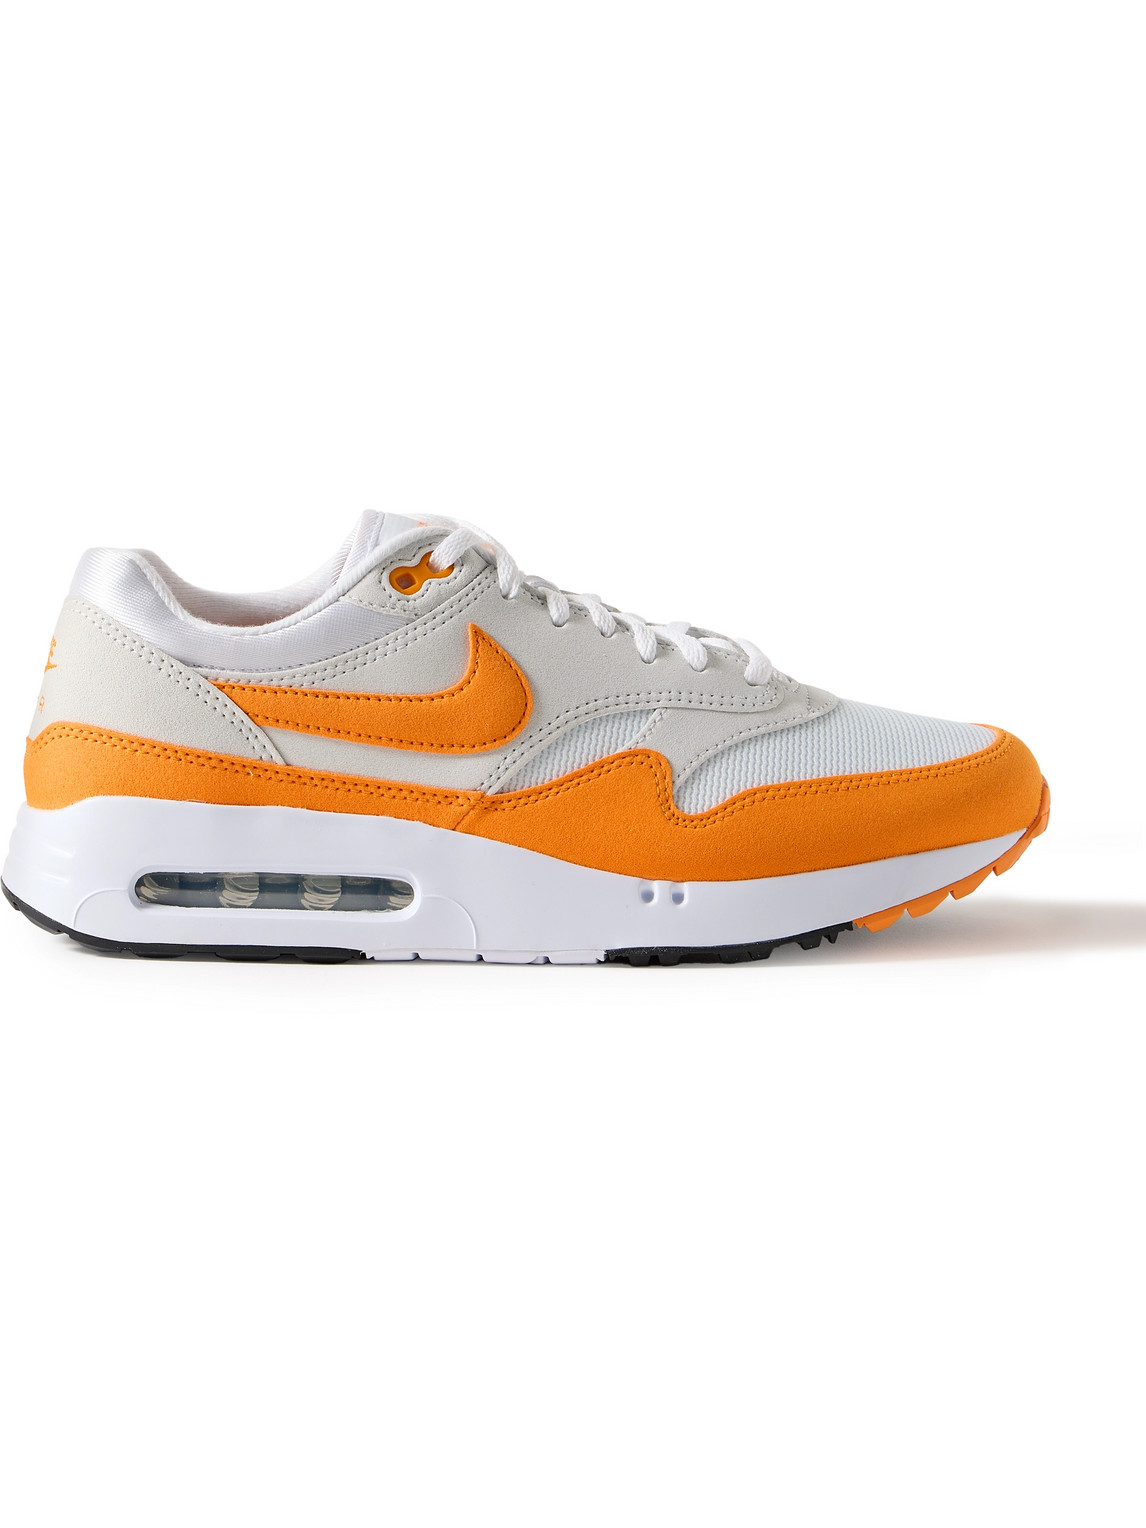 Nike Air Max 1 '86 Og G Suede And Mesh Golf Sneakers In Orange